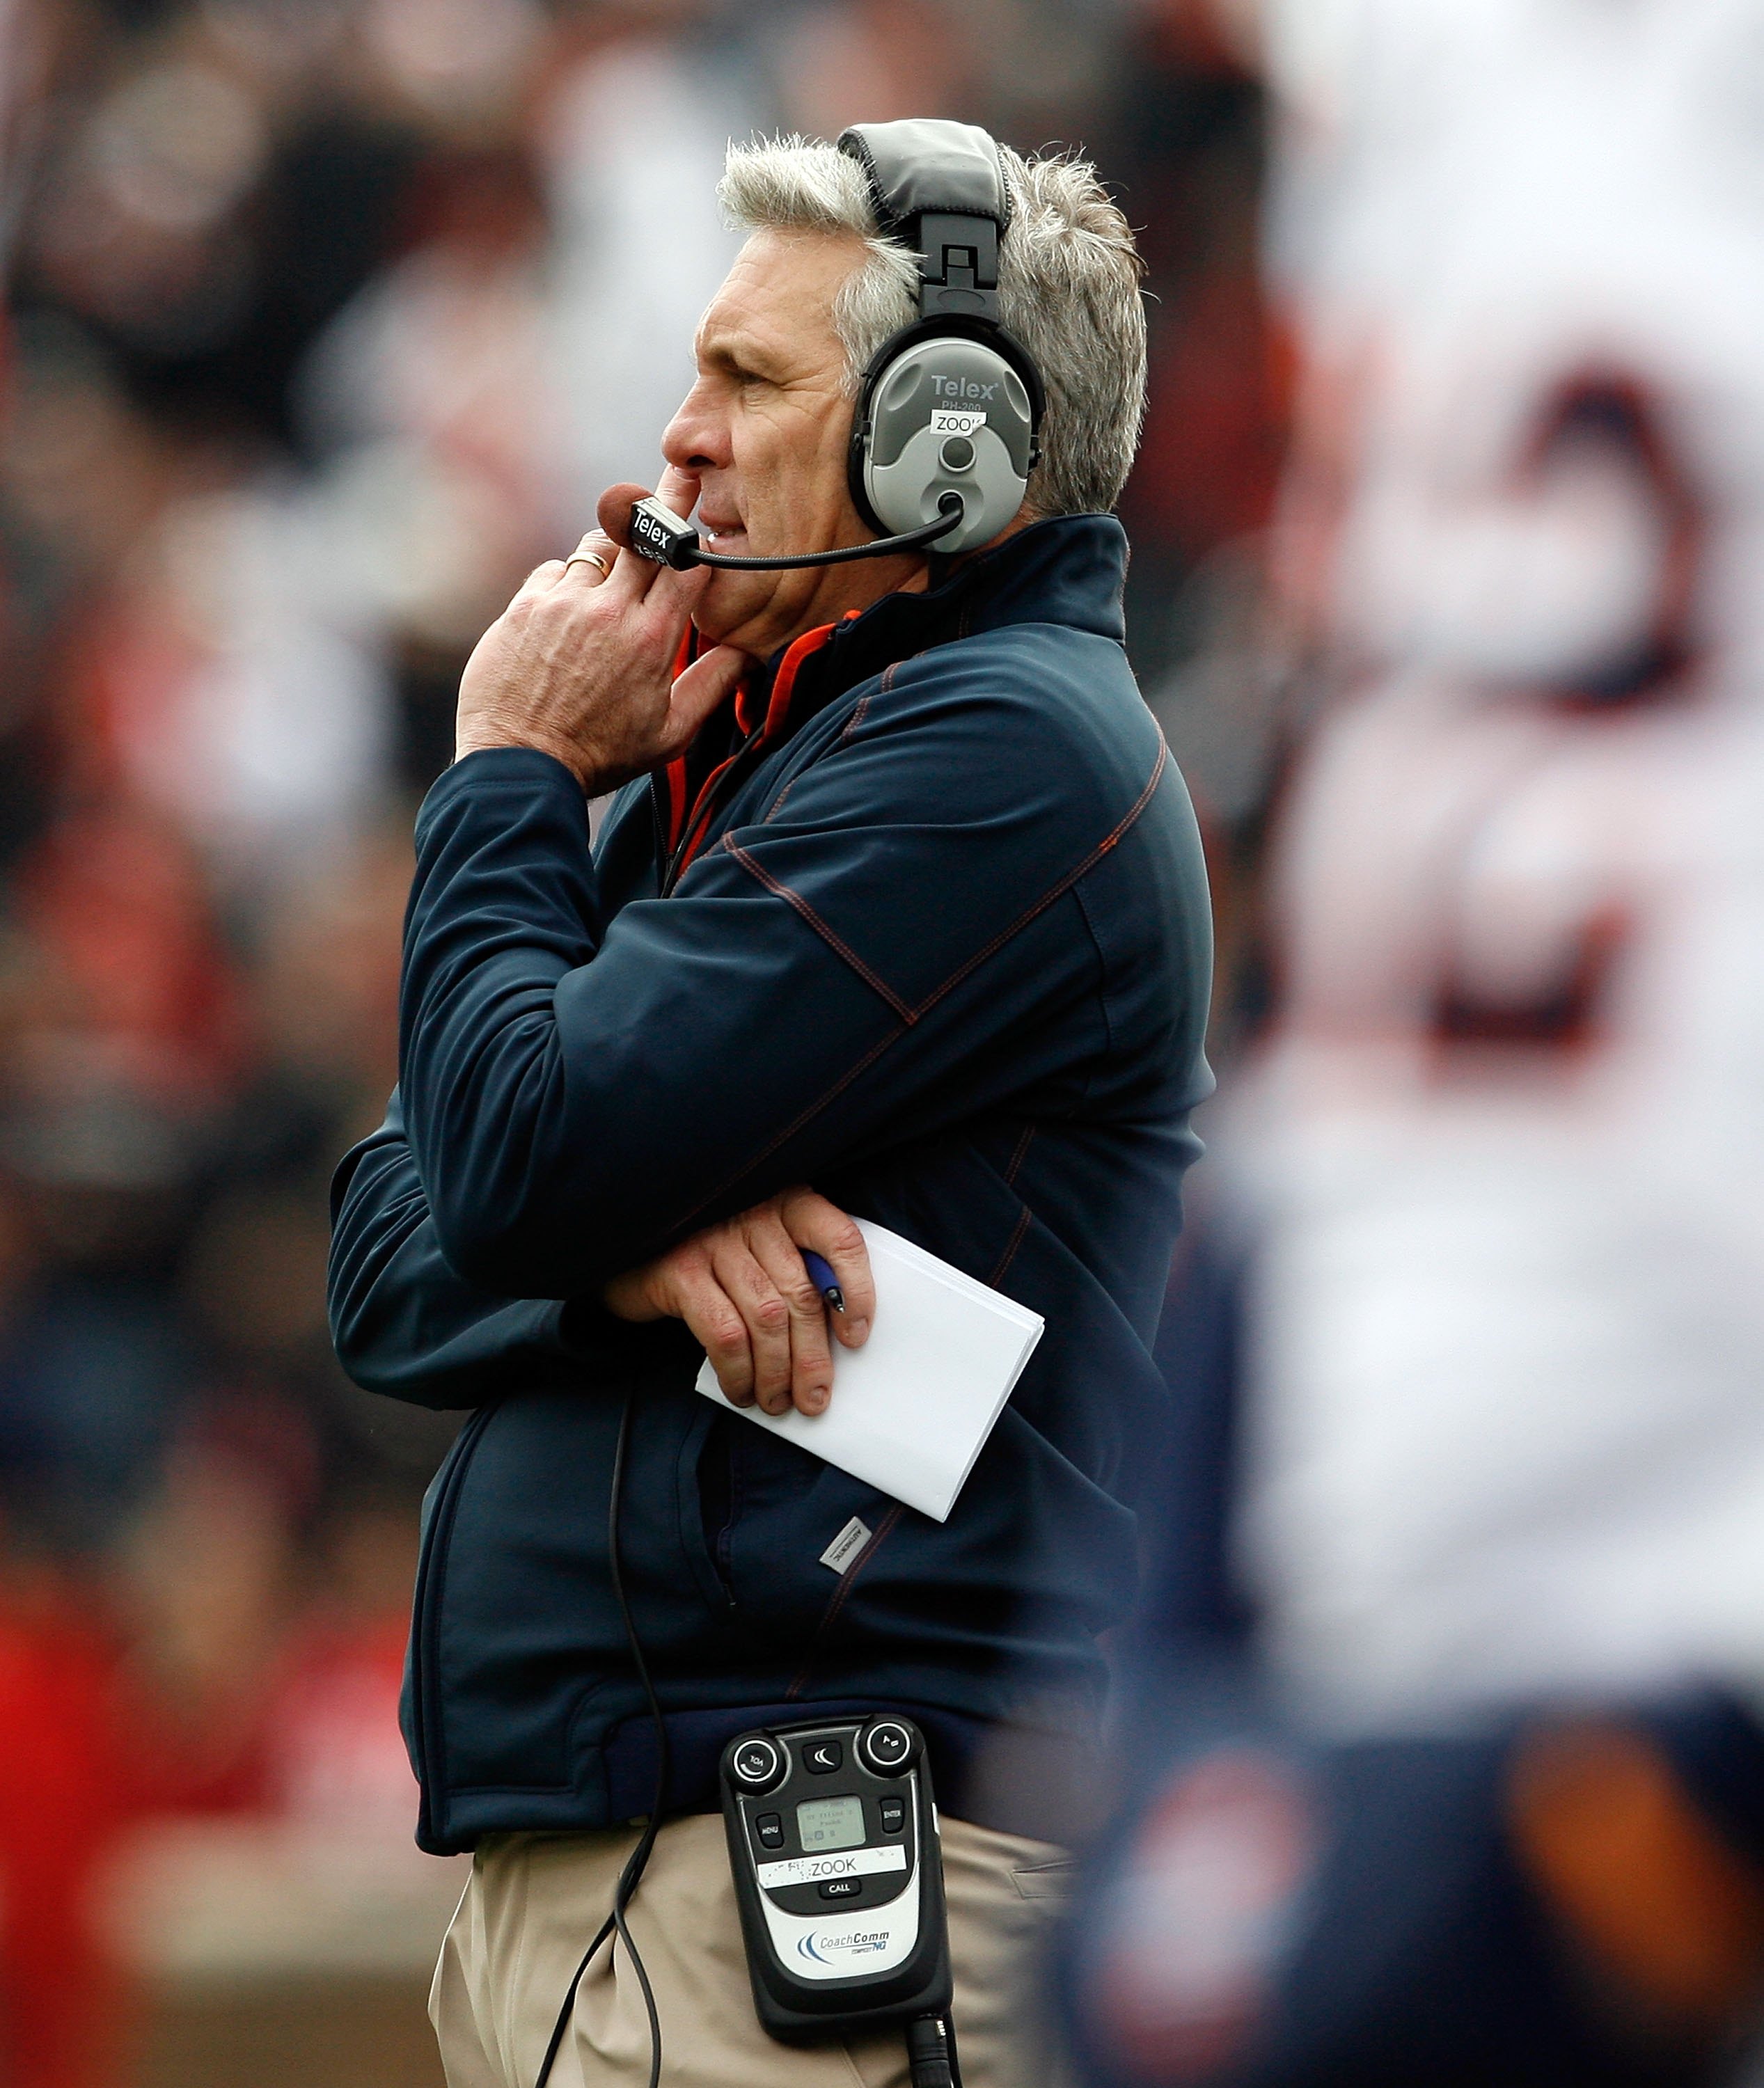 CINCINNATI - NOVEMBER 27:  Ron Zook the Head Coach of the Illinois Fighting Illini is pictured during the game against the Cincinnati Bearcats at Nippert Stadium on November 27, 2009 in Cincinnati, Ohio.  (Photo by Andy Lyons/Getty Images)